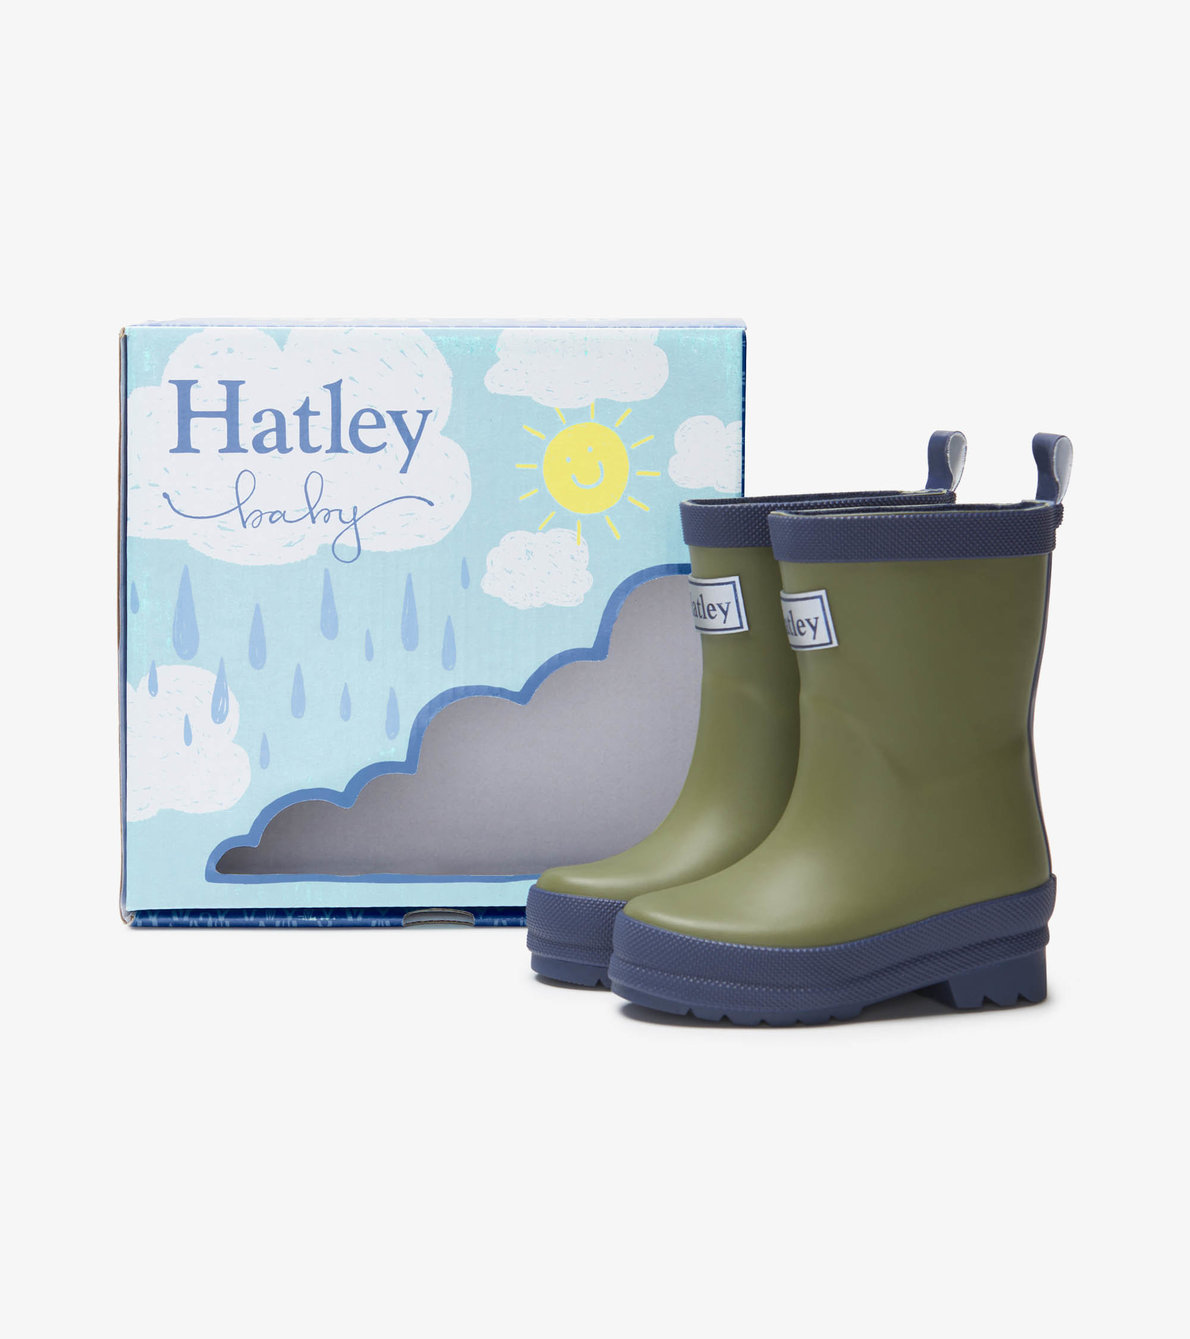 View larger image of My 1st Wellies - Forest Green